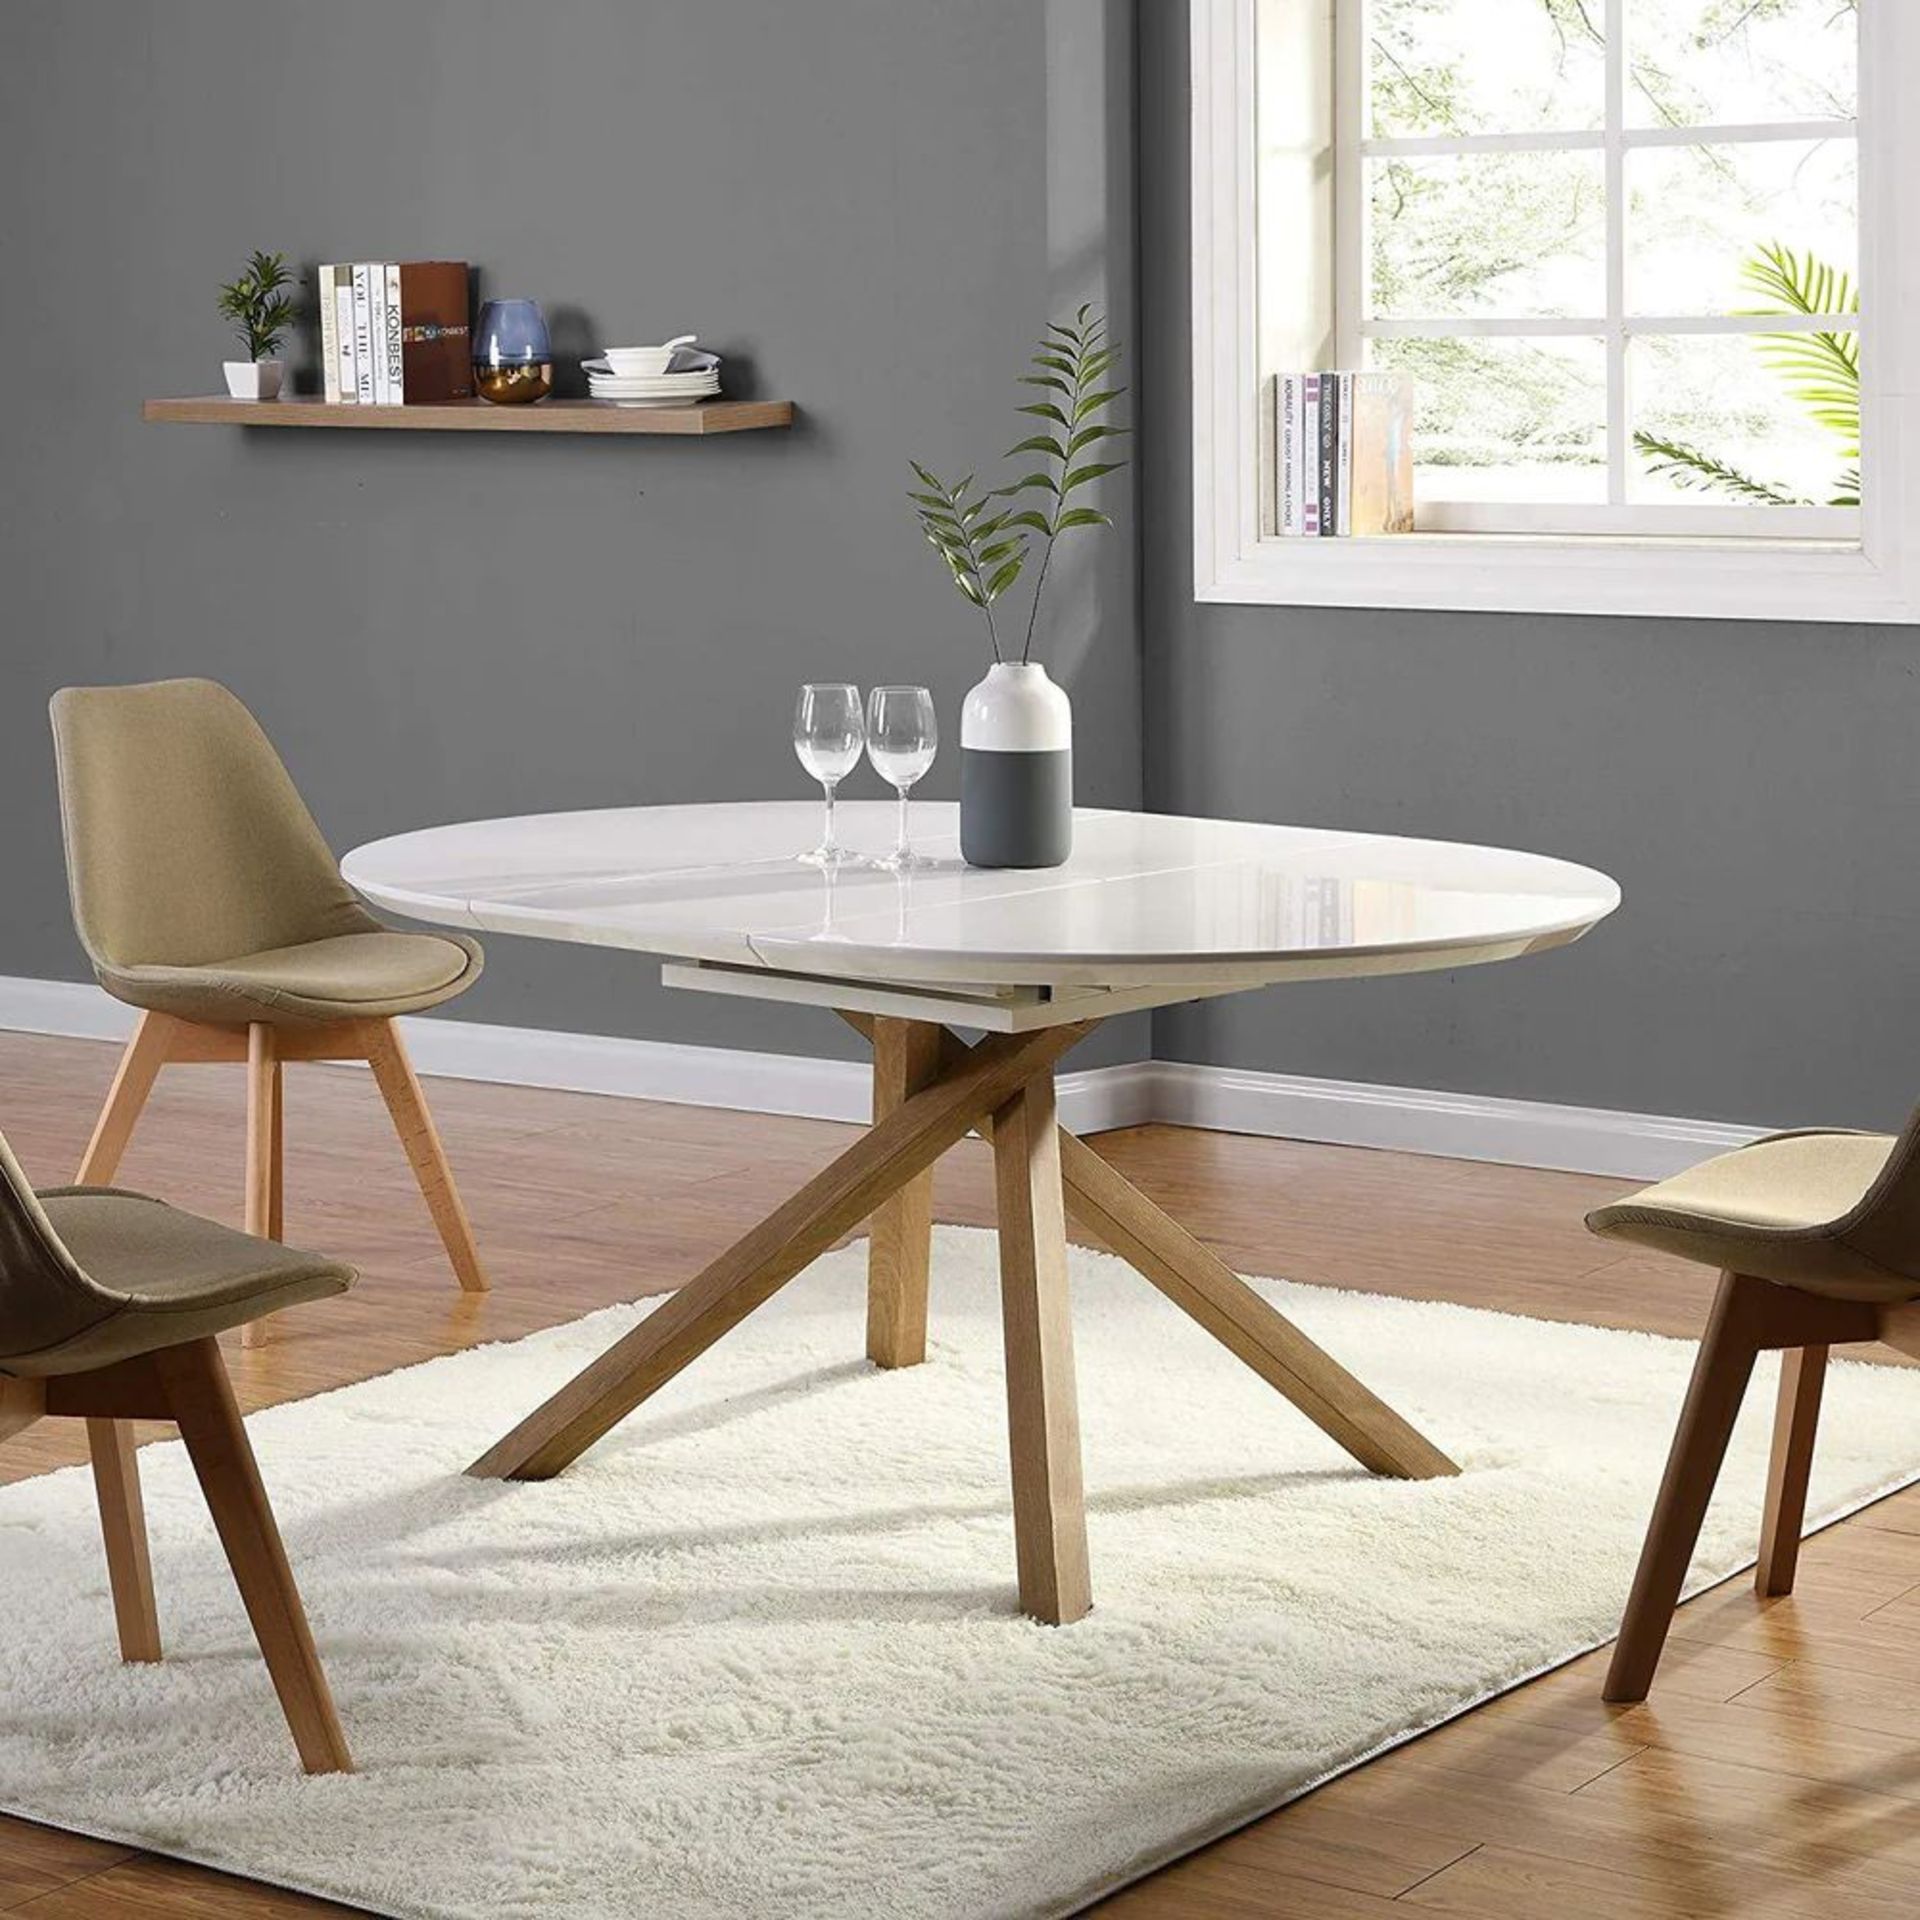 Grenchen Round to Oval 4 to 6-Seater White High Gloss Extendable Dining Table. - BI. RRP £419.99.